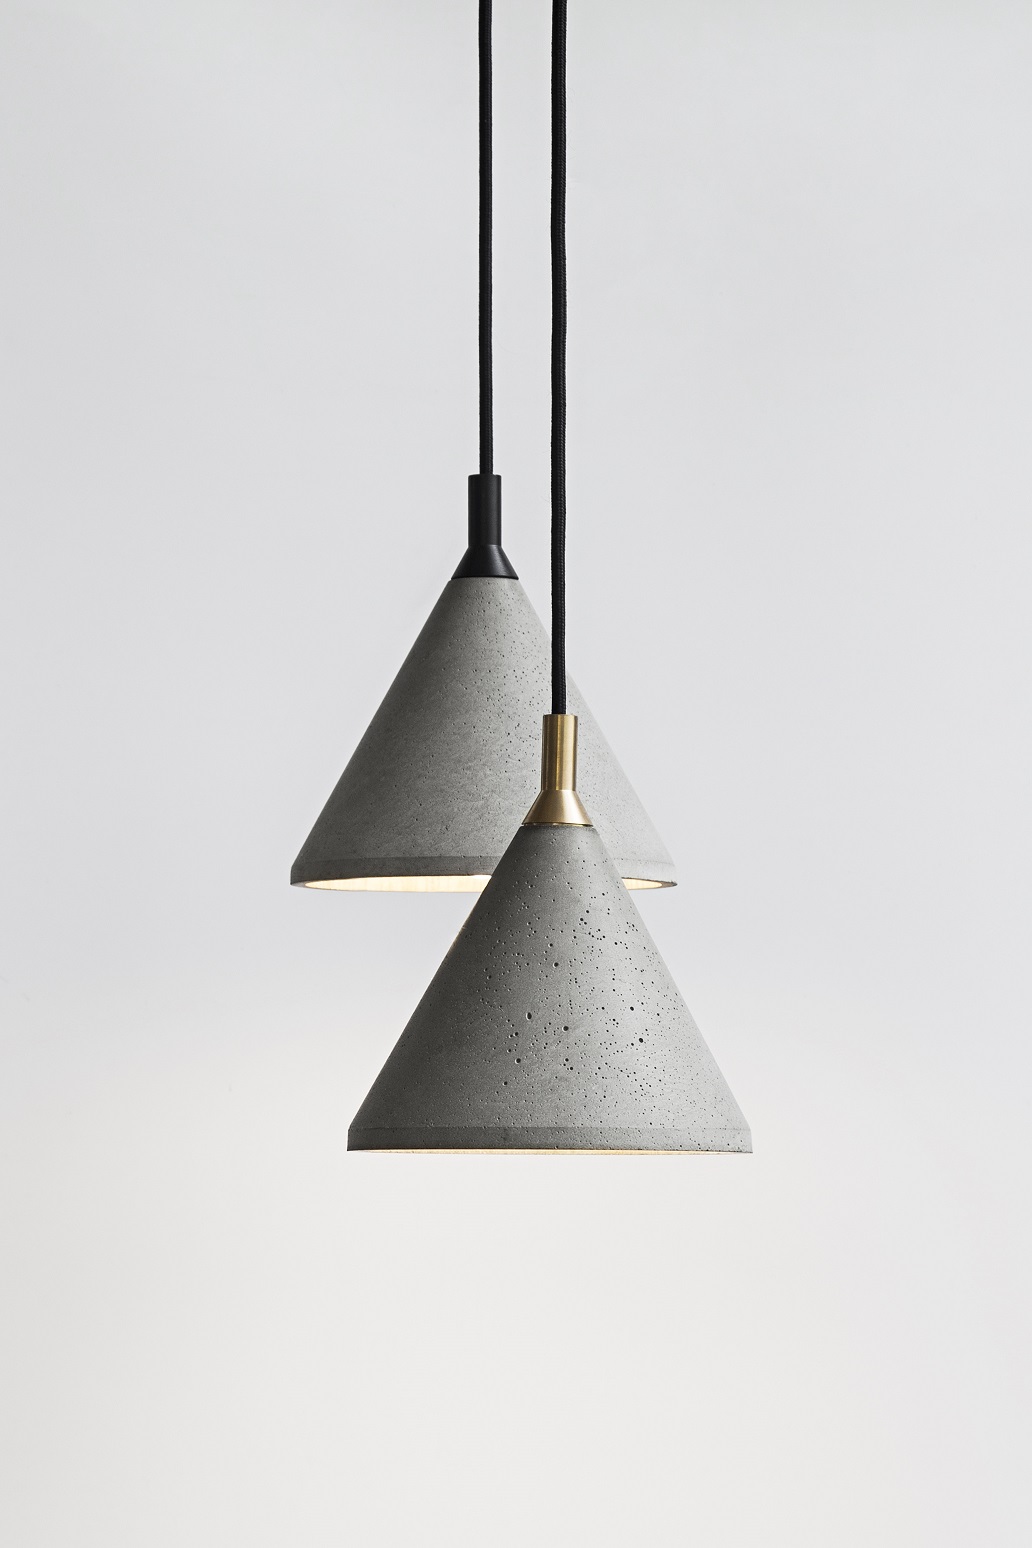 zhong recycled concrete lights